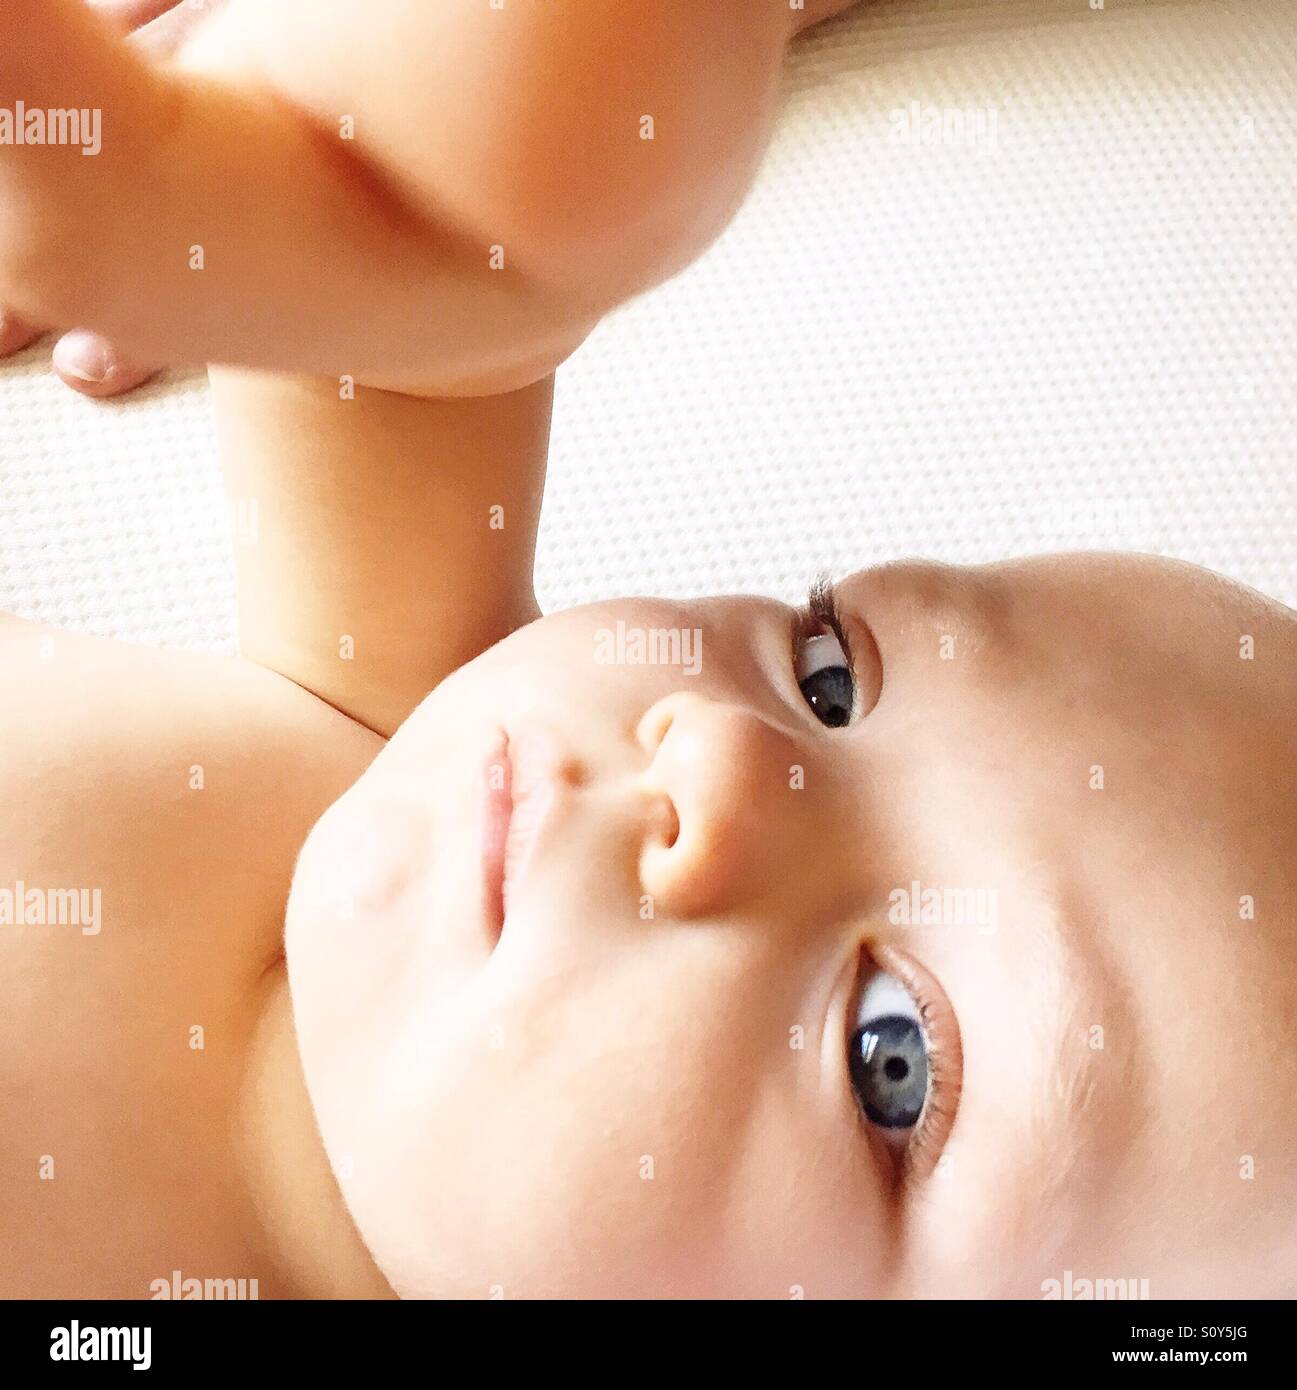 Cute little baby looking at camera Stock Photo